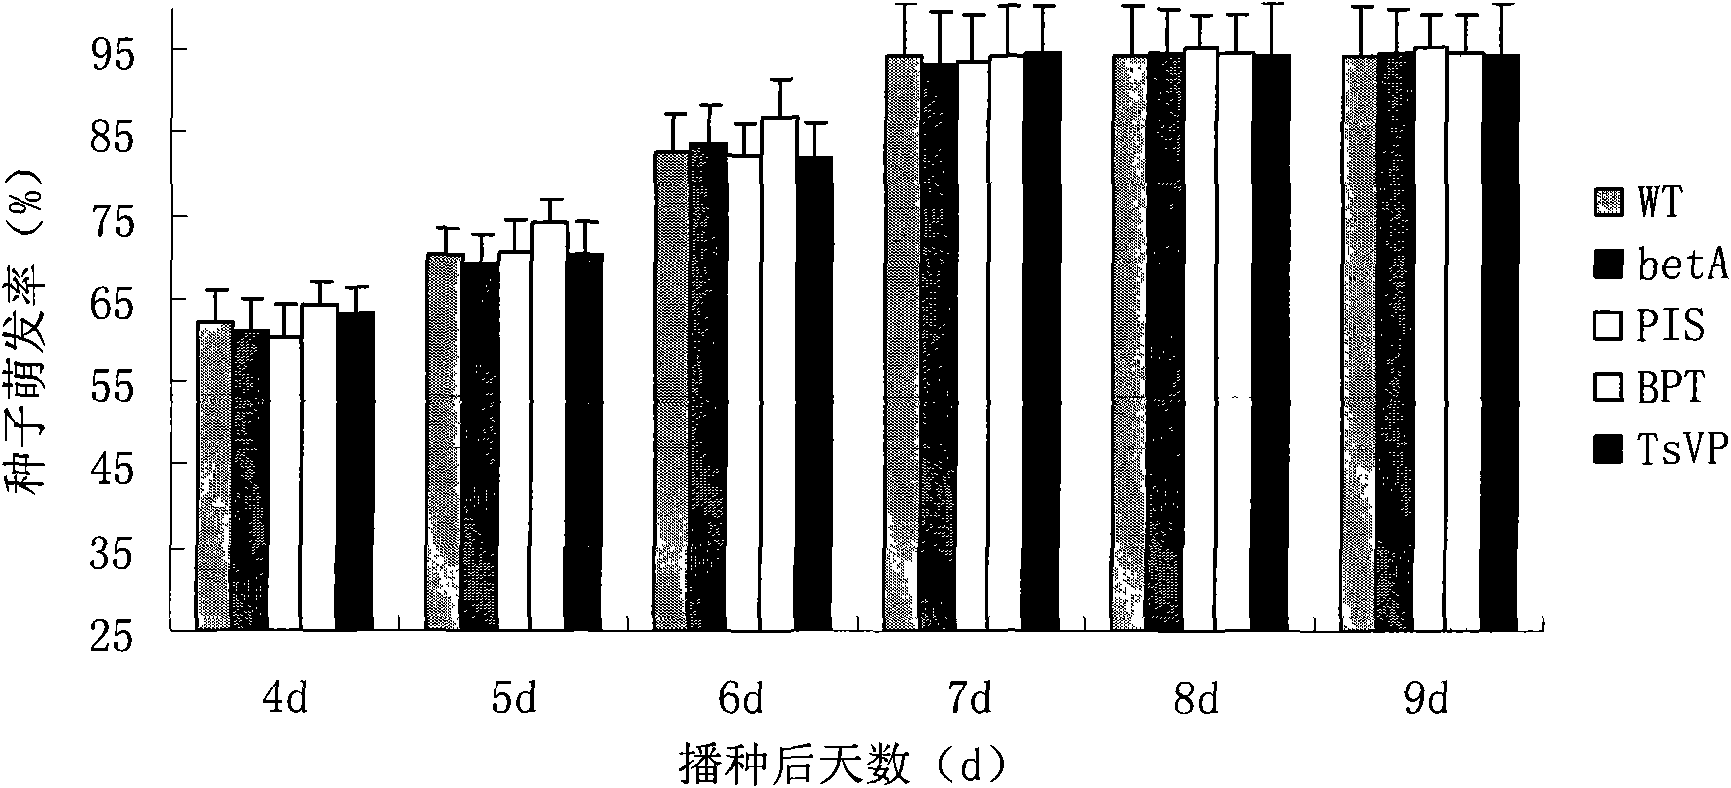 Method for heightening salt tolerance and drought tolerance of cotton by polymeric stress-resistant gene